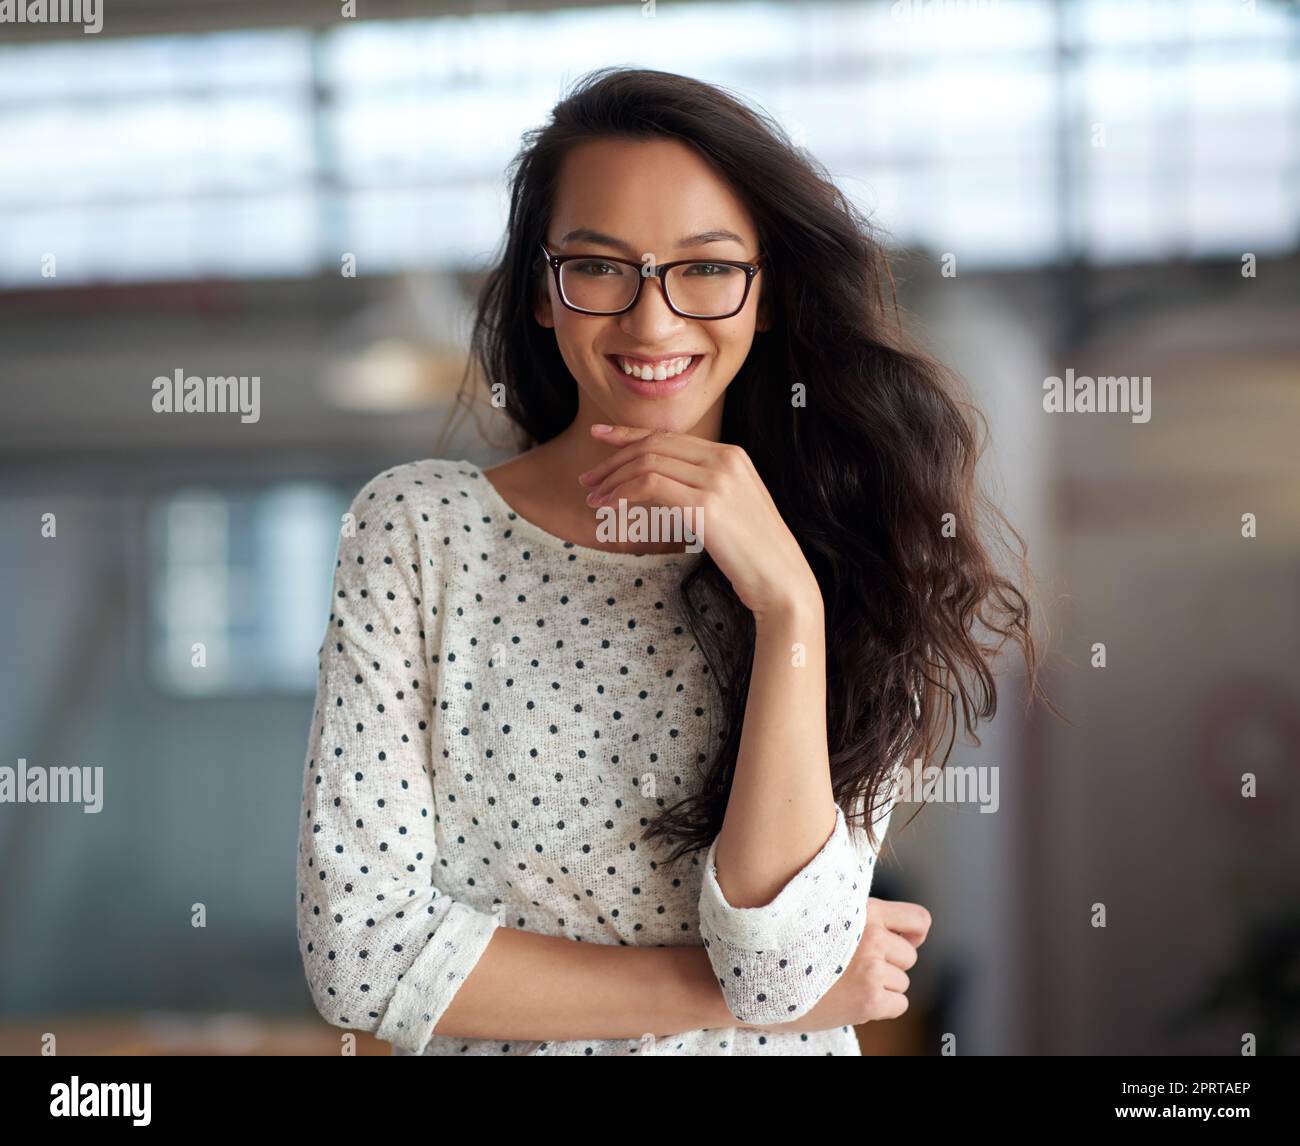 Creative Genius. Portrait of a vivacious young trendy woman in an industrial setting. Stock Photo